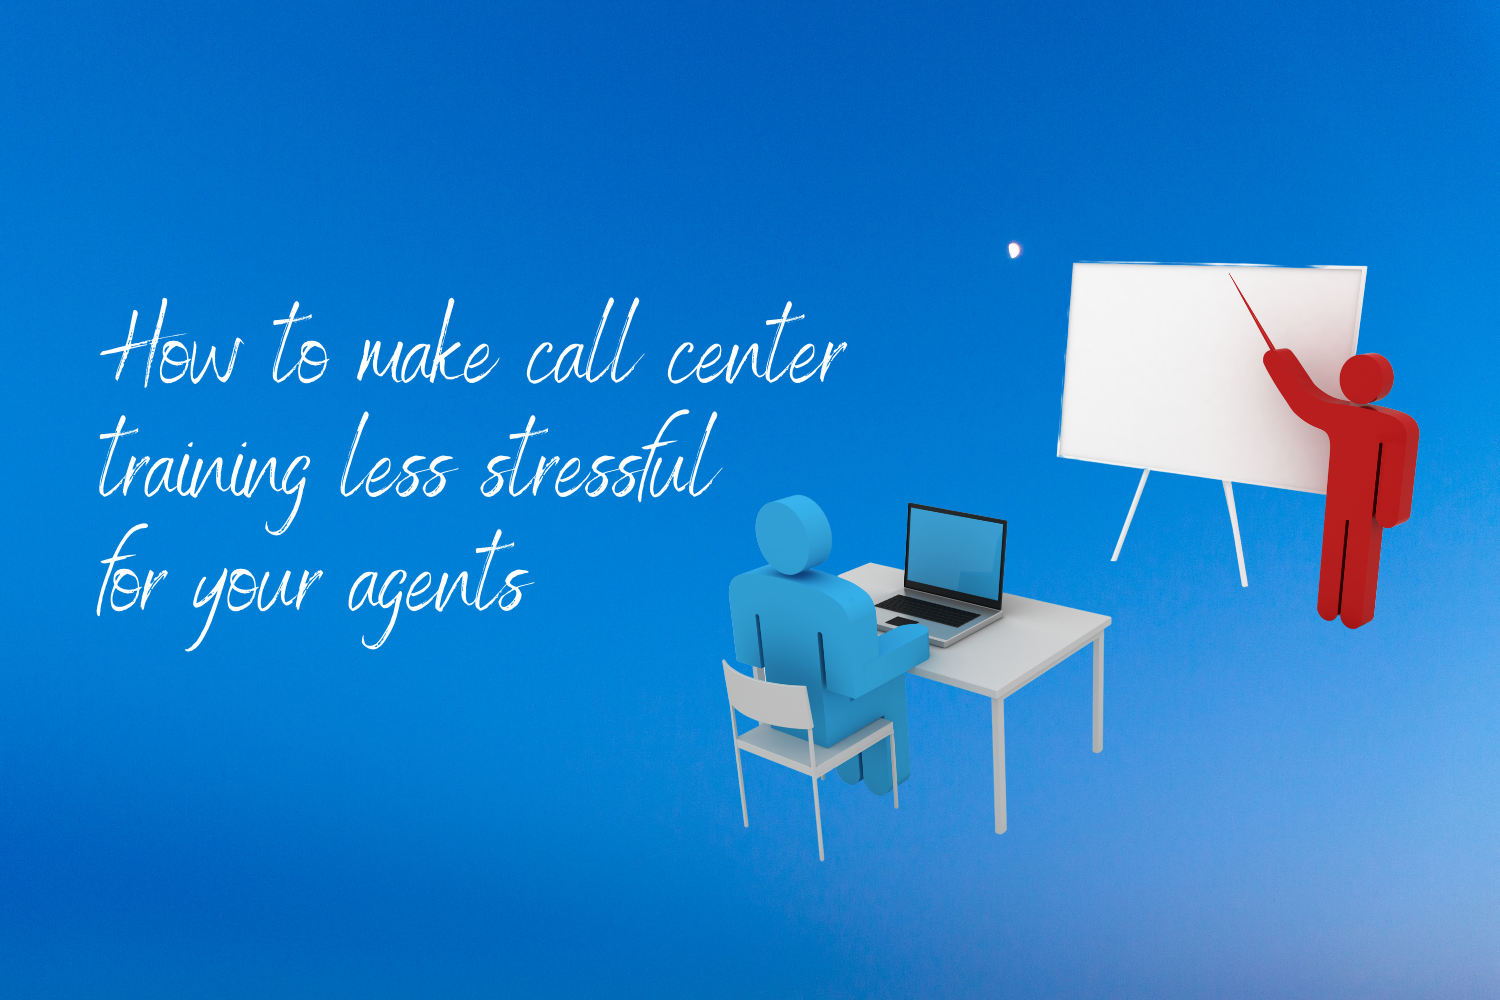 How to Make Call Center Training Less Stressful For Your Agents (4 Tips)